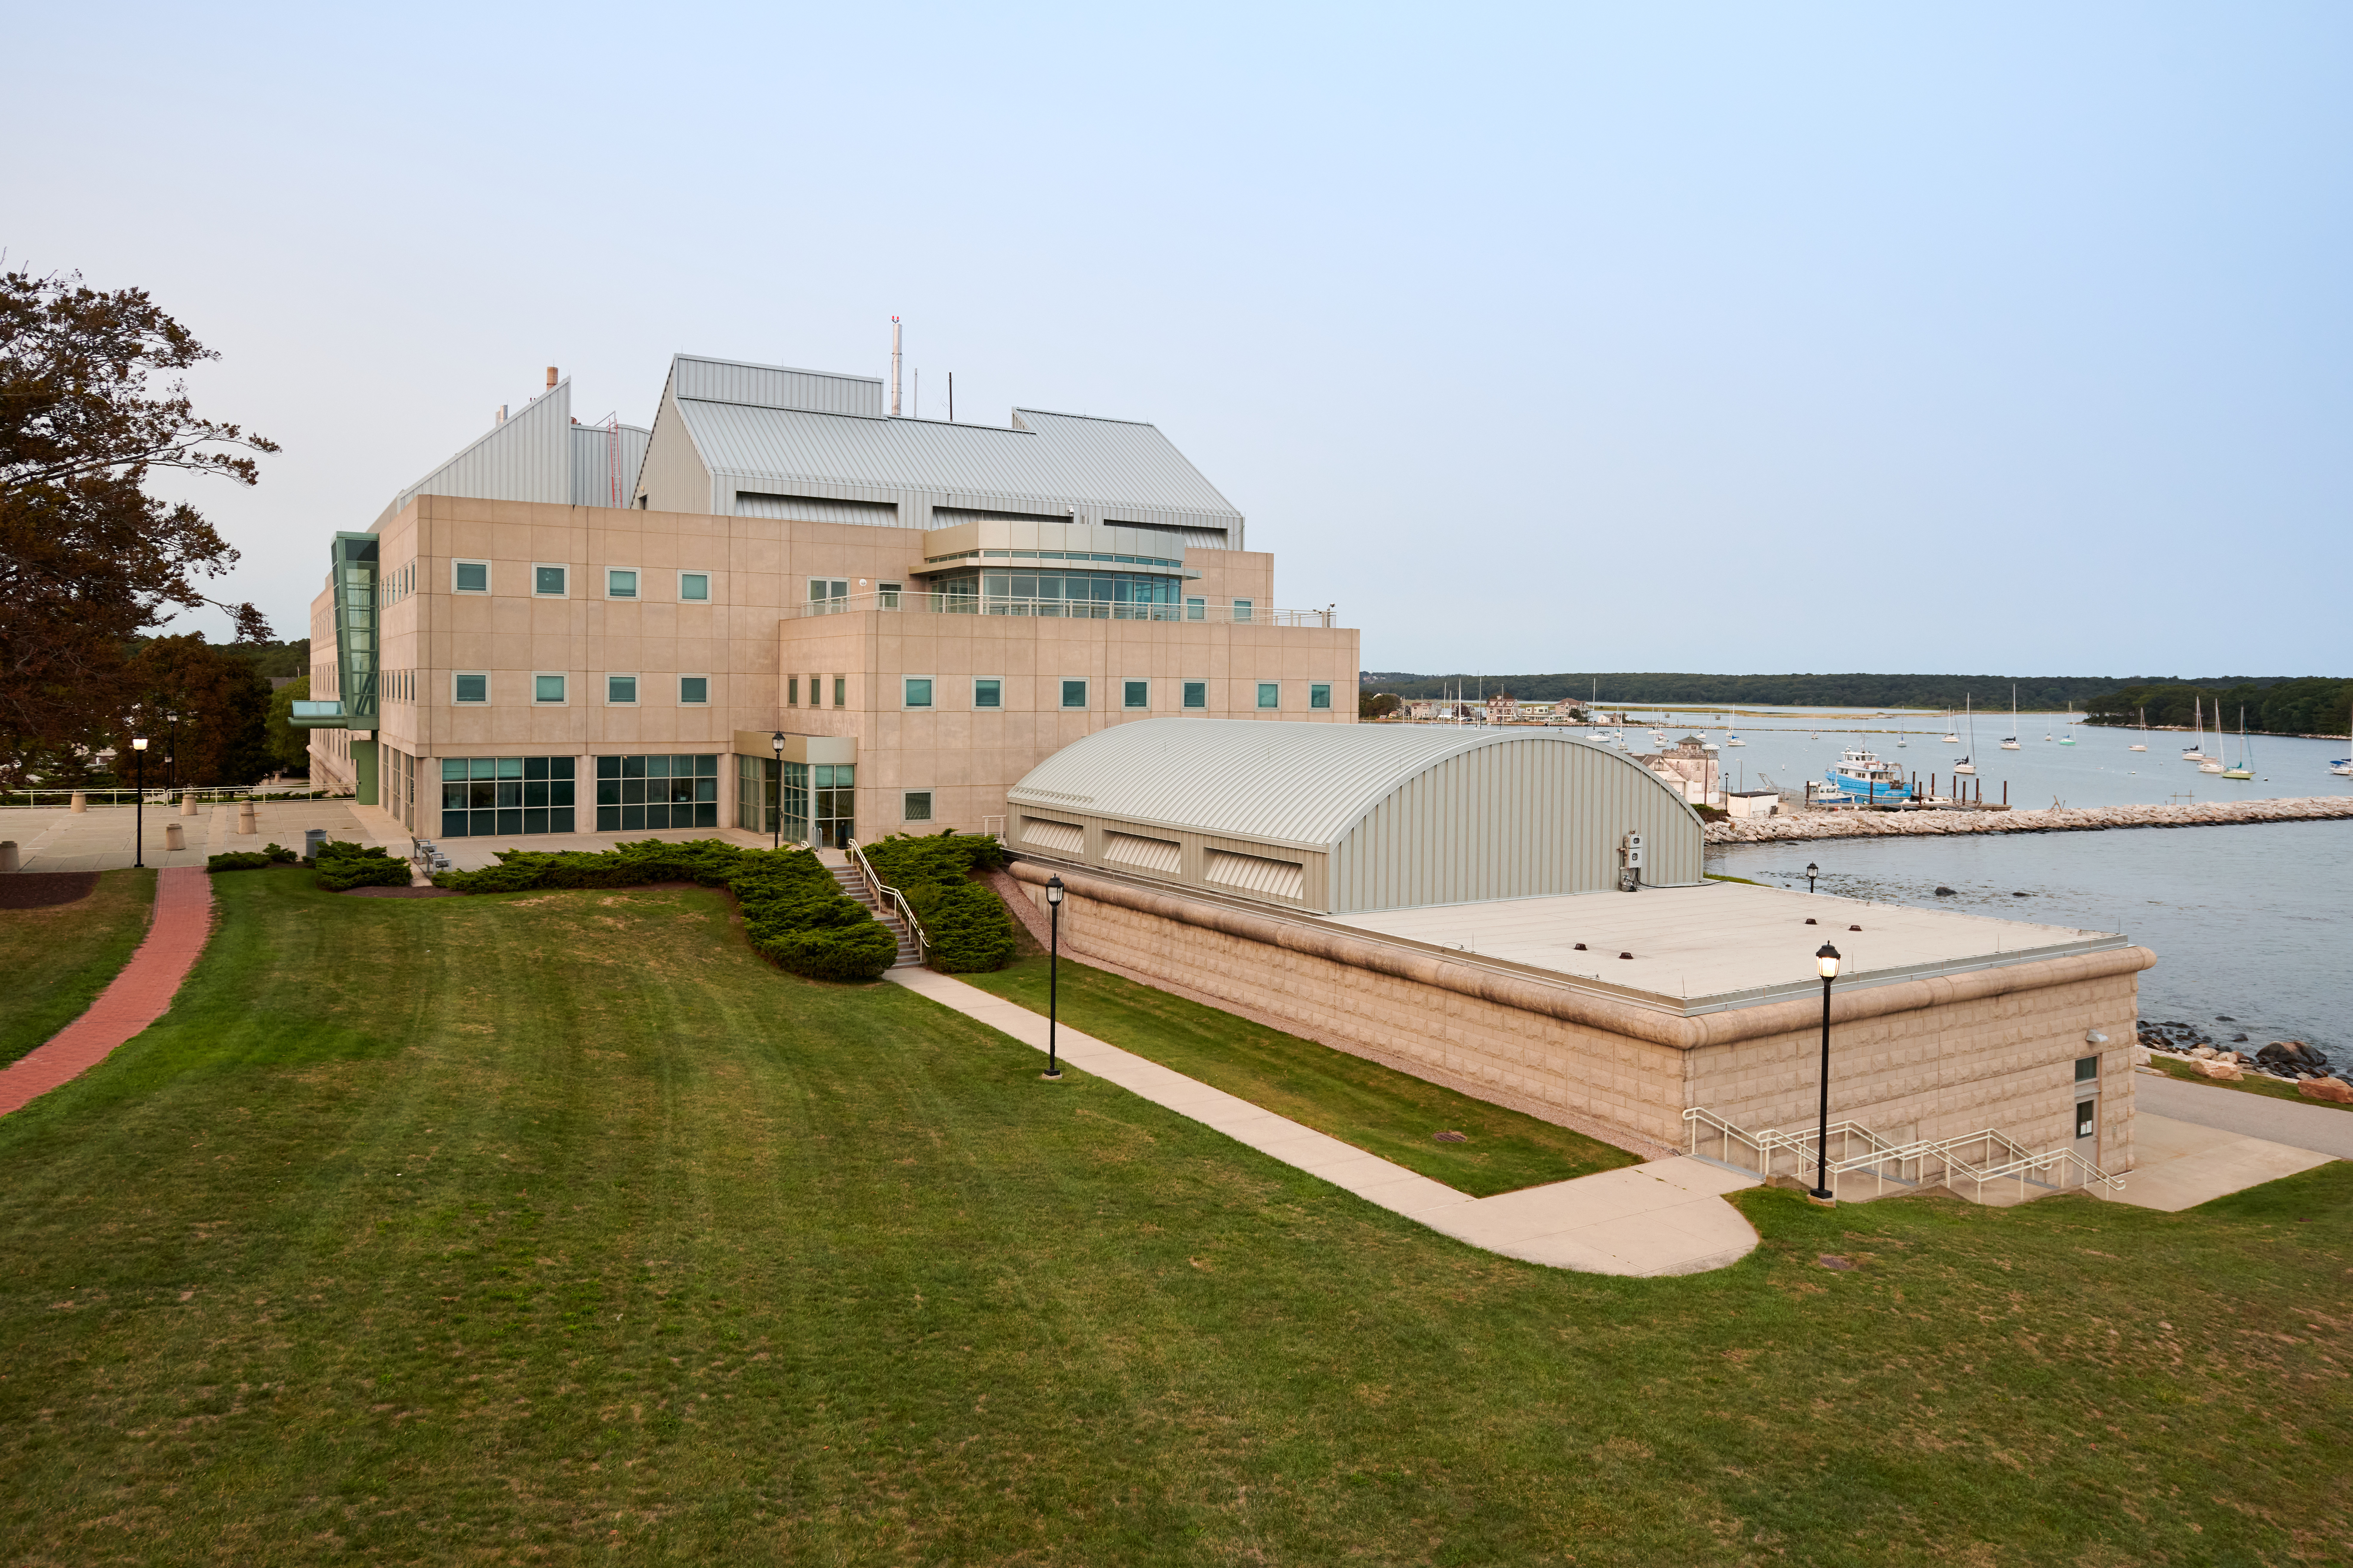 A view of the Marine Sciences Building at the Avery Point campus